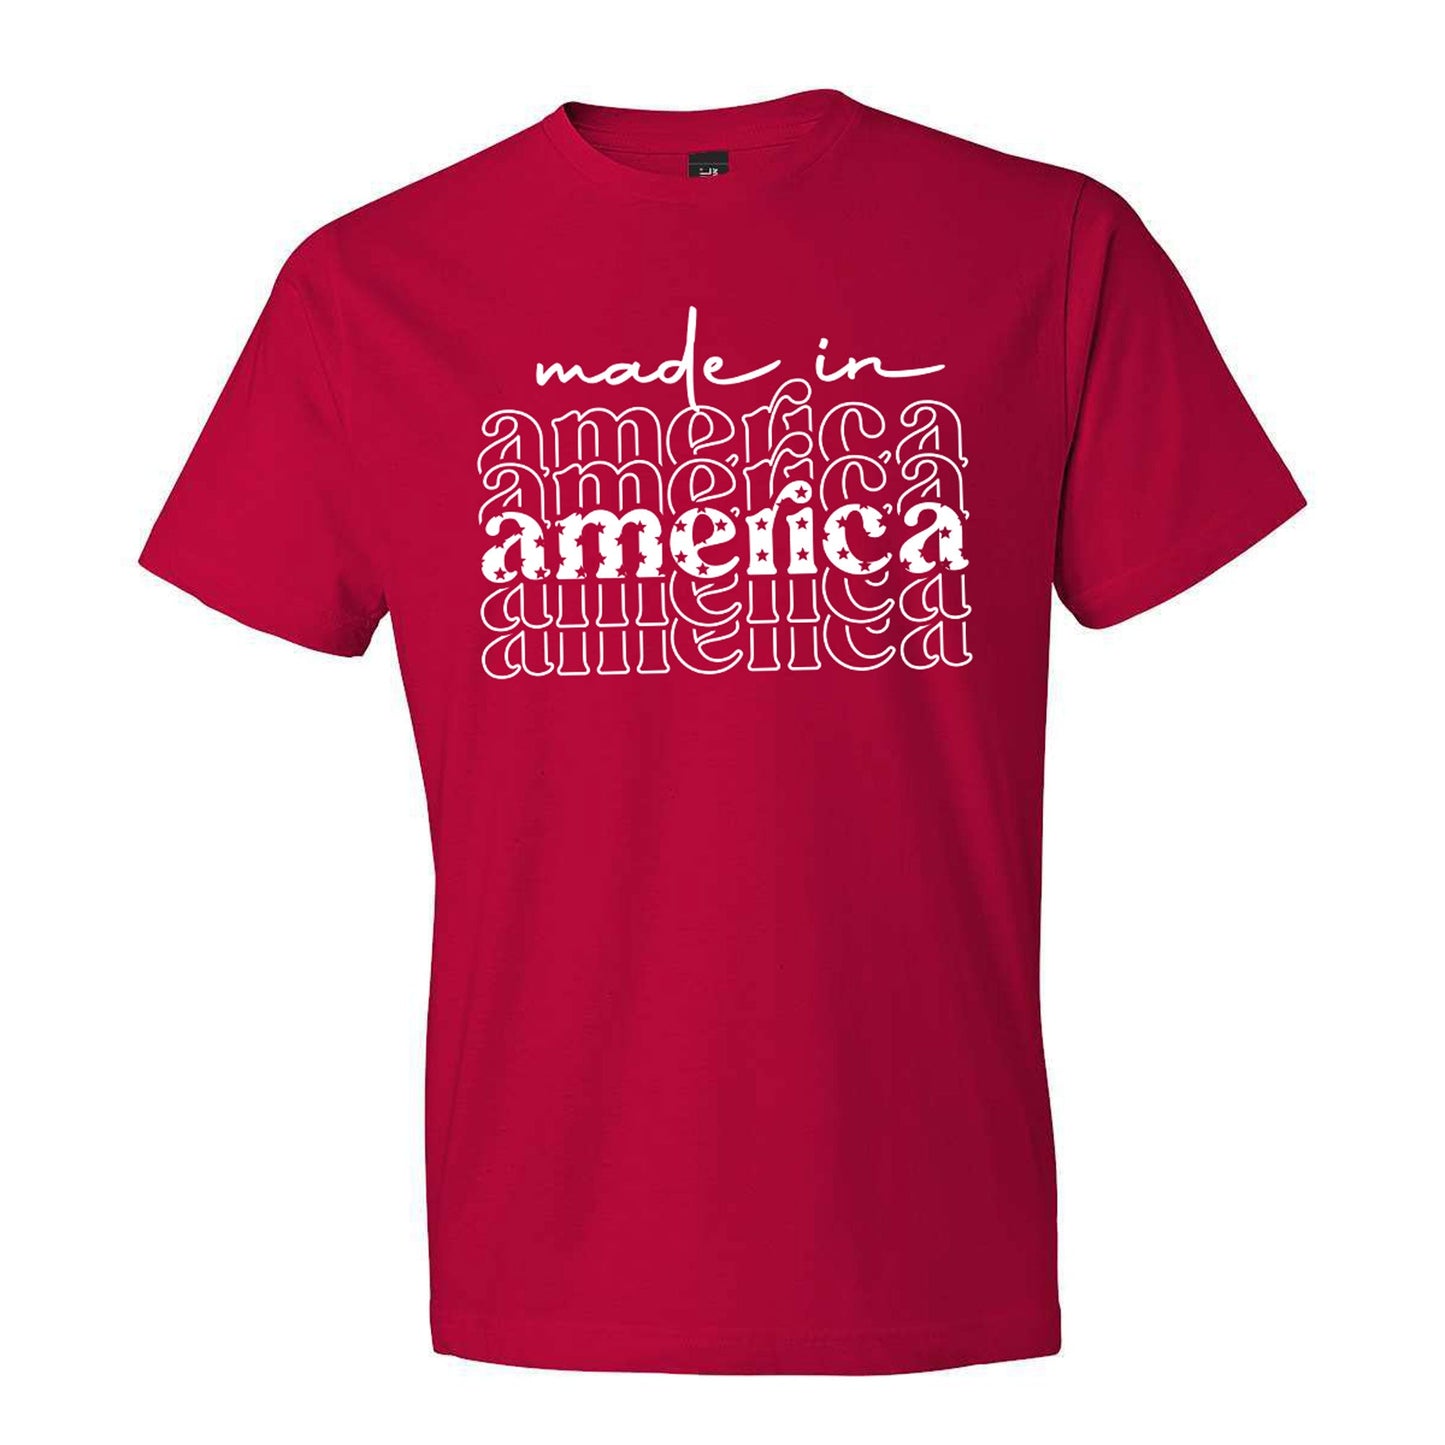 red t-shirt featuring a made in america retro white print